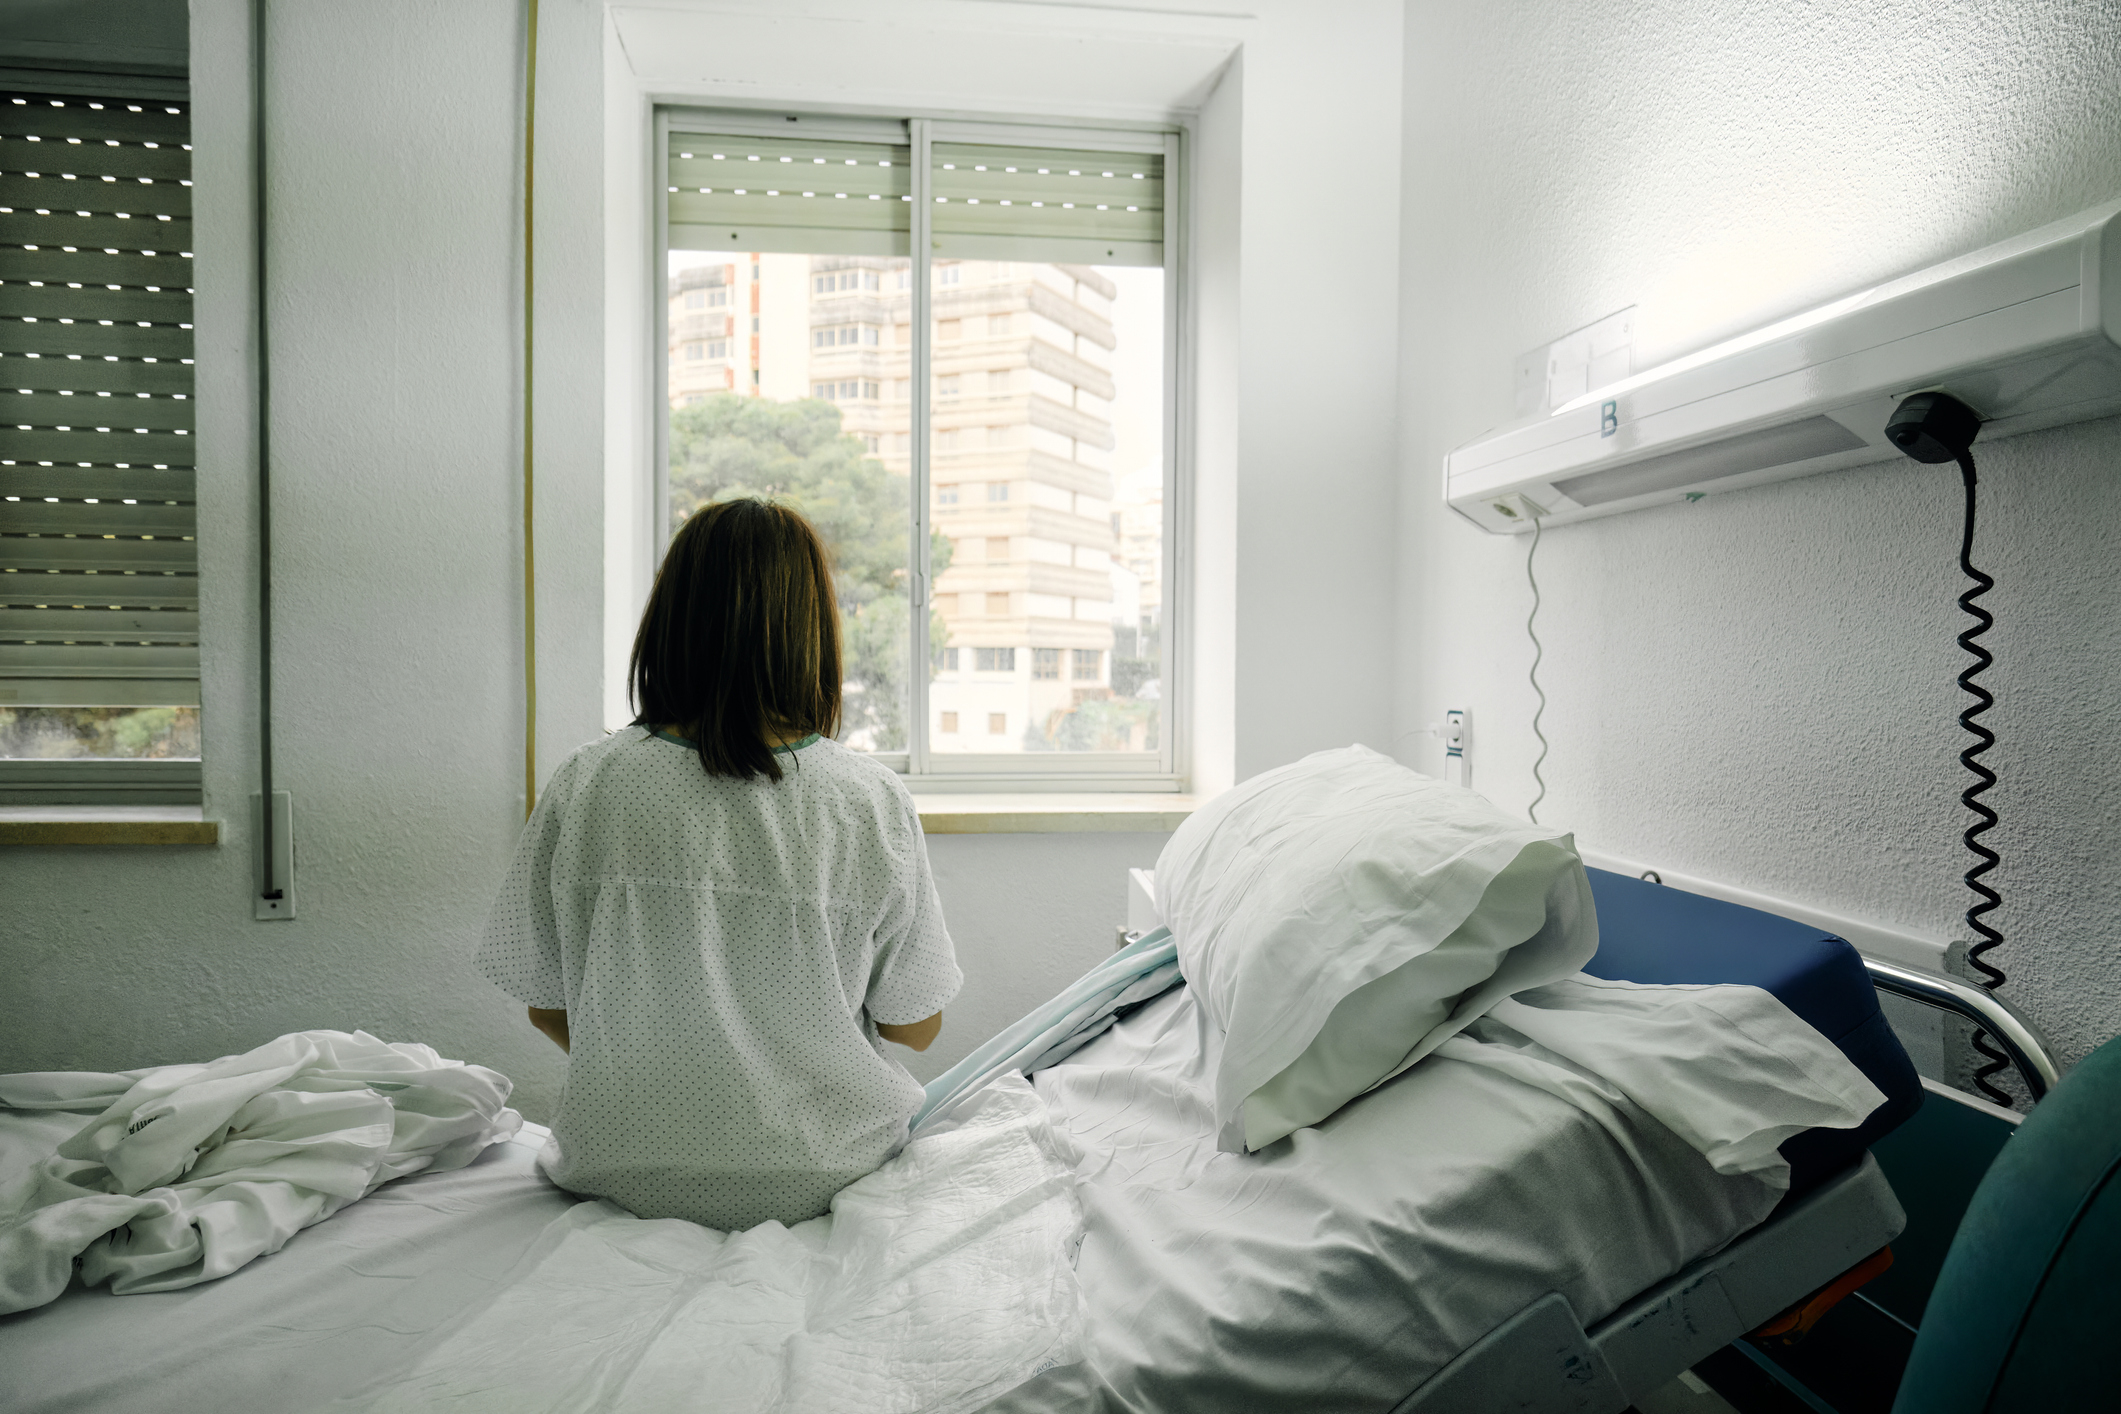 Person sitting on a hospital bed looking out the window, suggesting themes of health and parenting